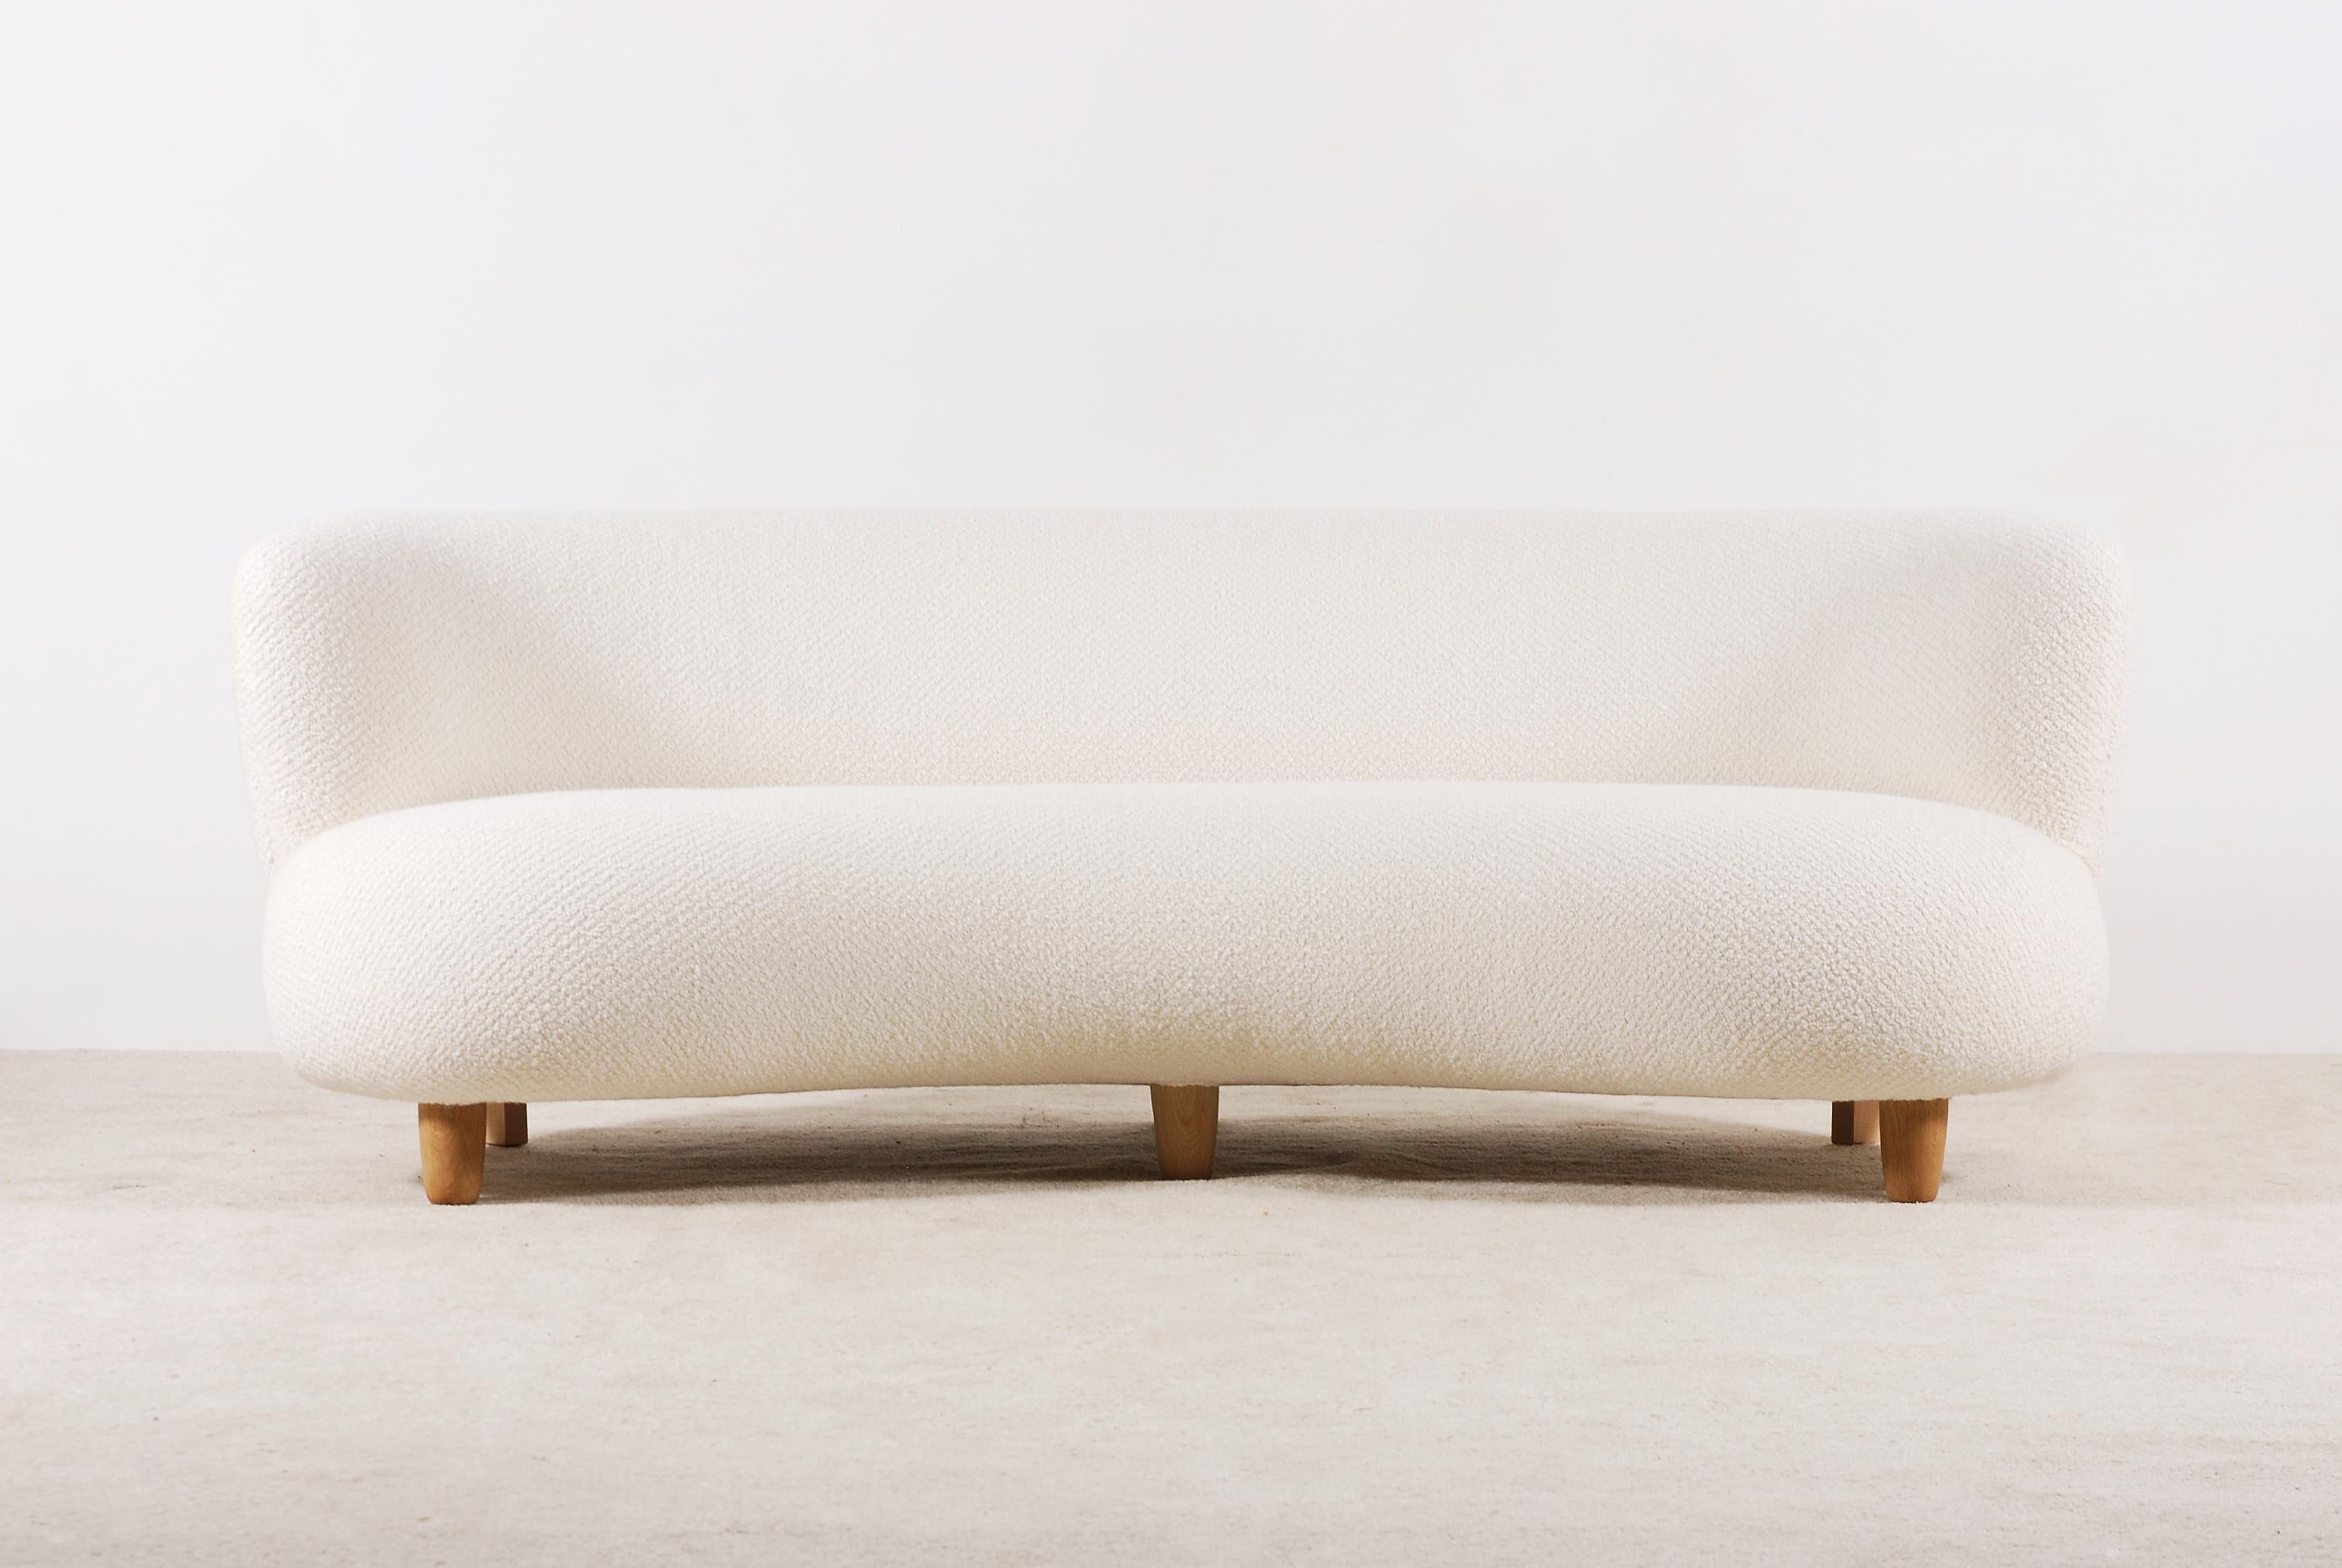 Large and well shaped three-seat curved sofa attributed to Otto Schulz.
Very soft and comfortable seat. Oak feet.
Perfect condition, newly upholstered with a premium quality French wool fabric.
Manufacturing by Boet, in Sweden, circa 1940.